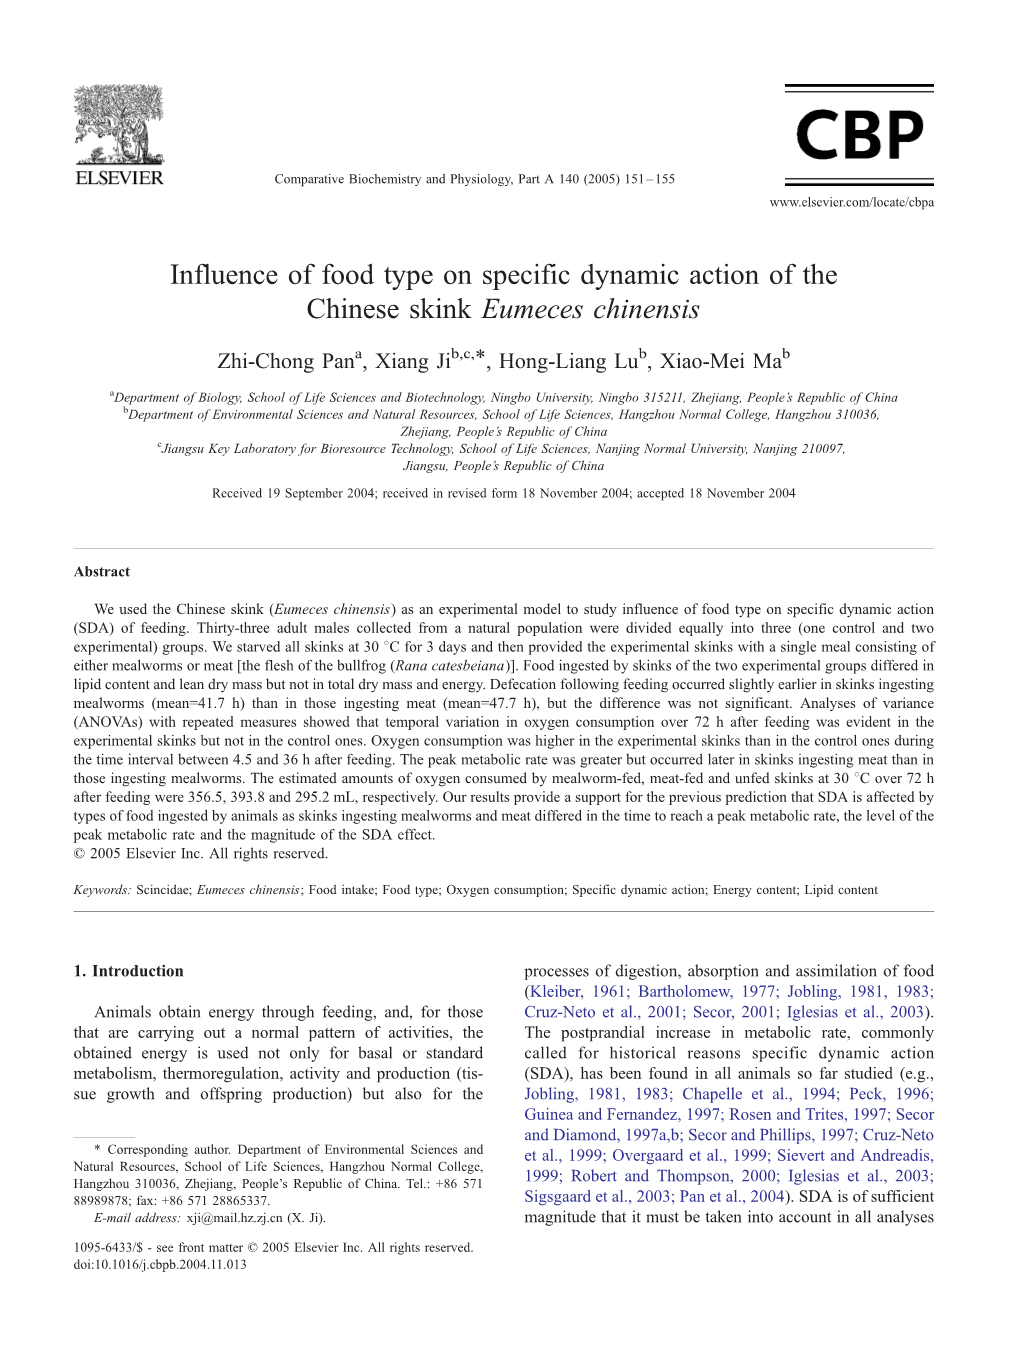 Influence of Food Type on Specific Dynamic Action of the Chinese Skink Eumeces Chinensis